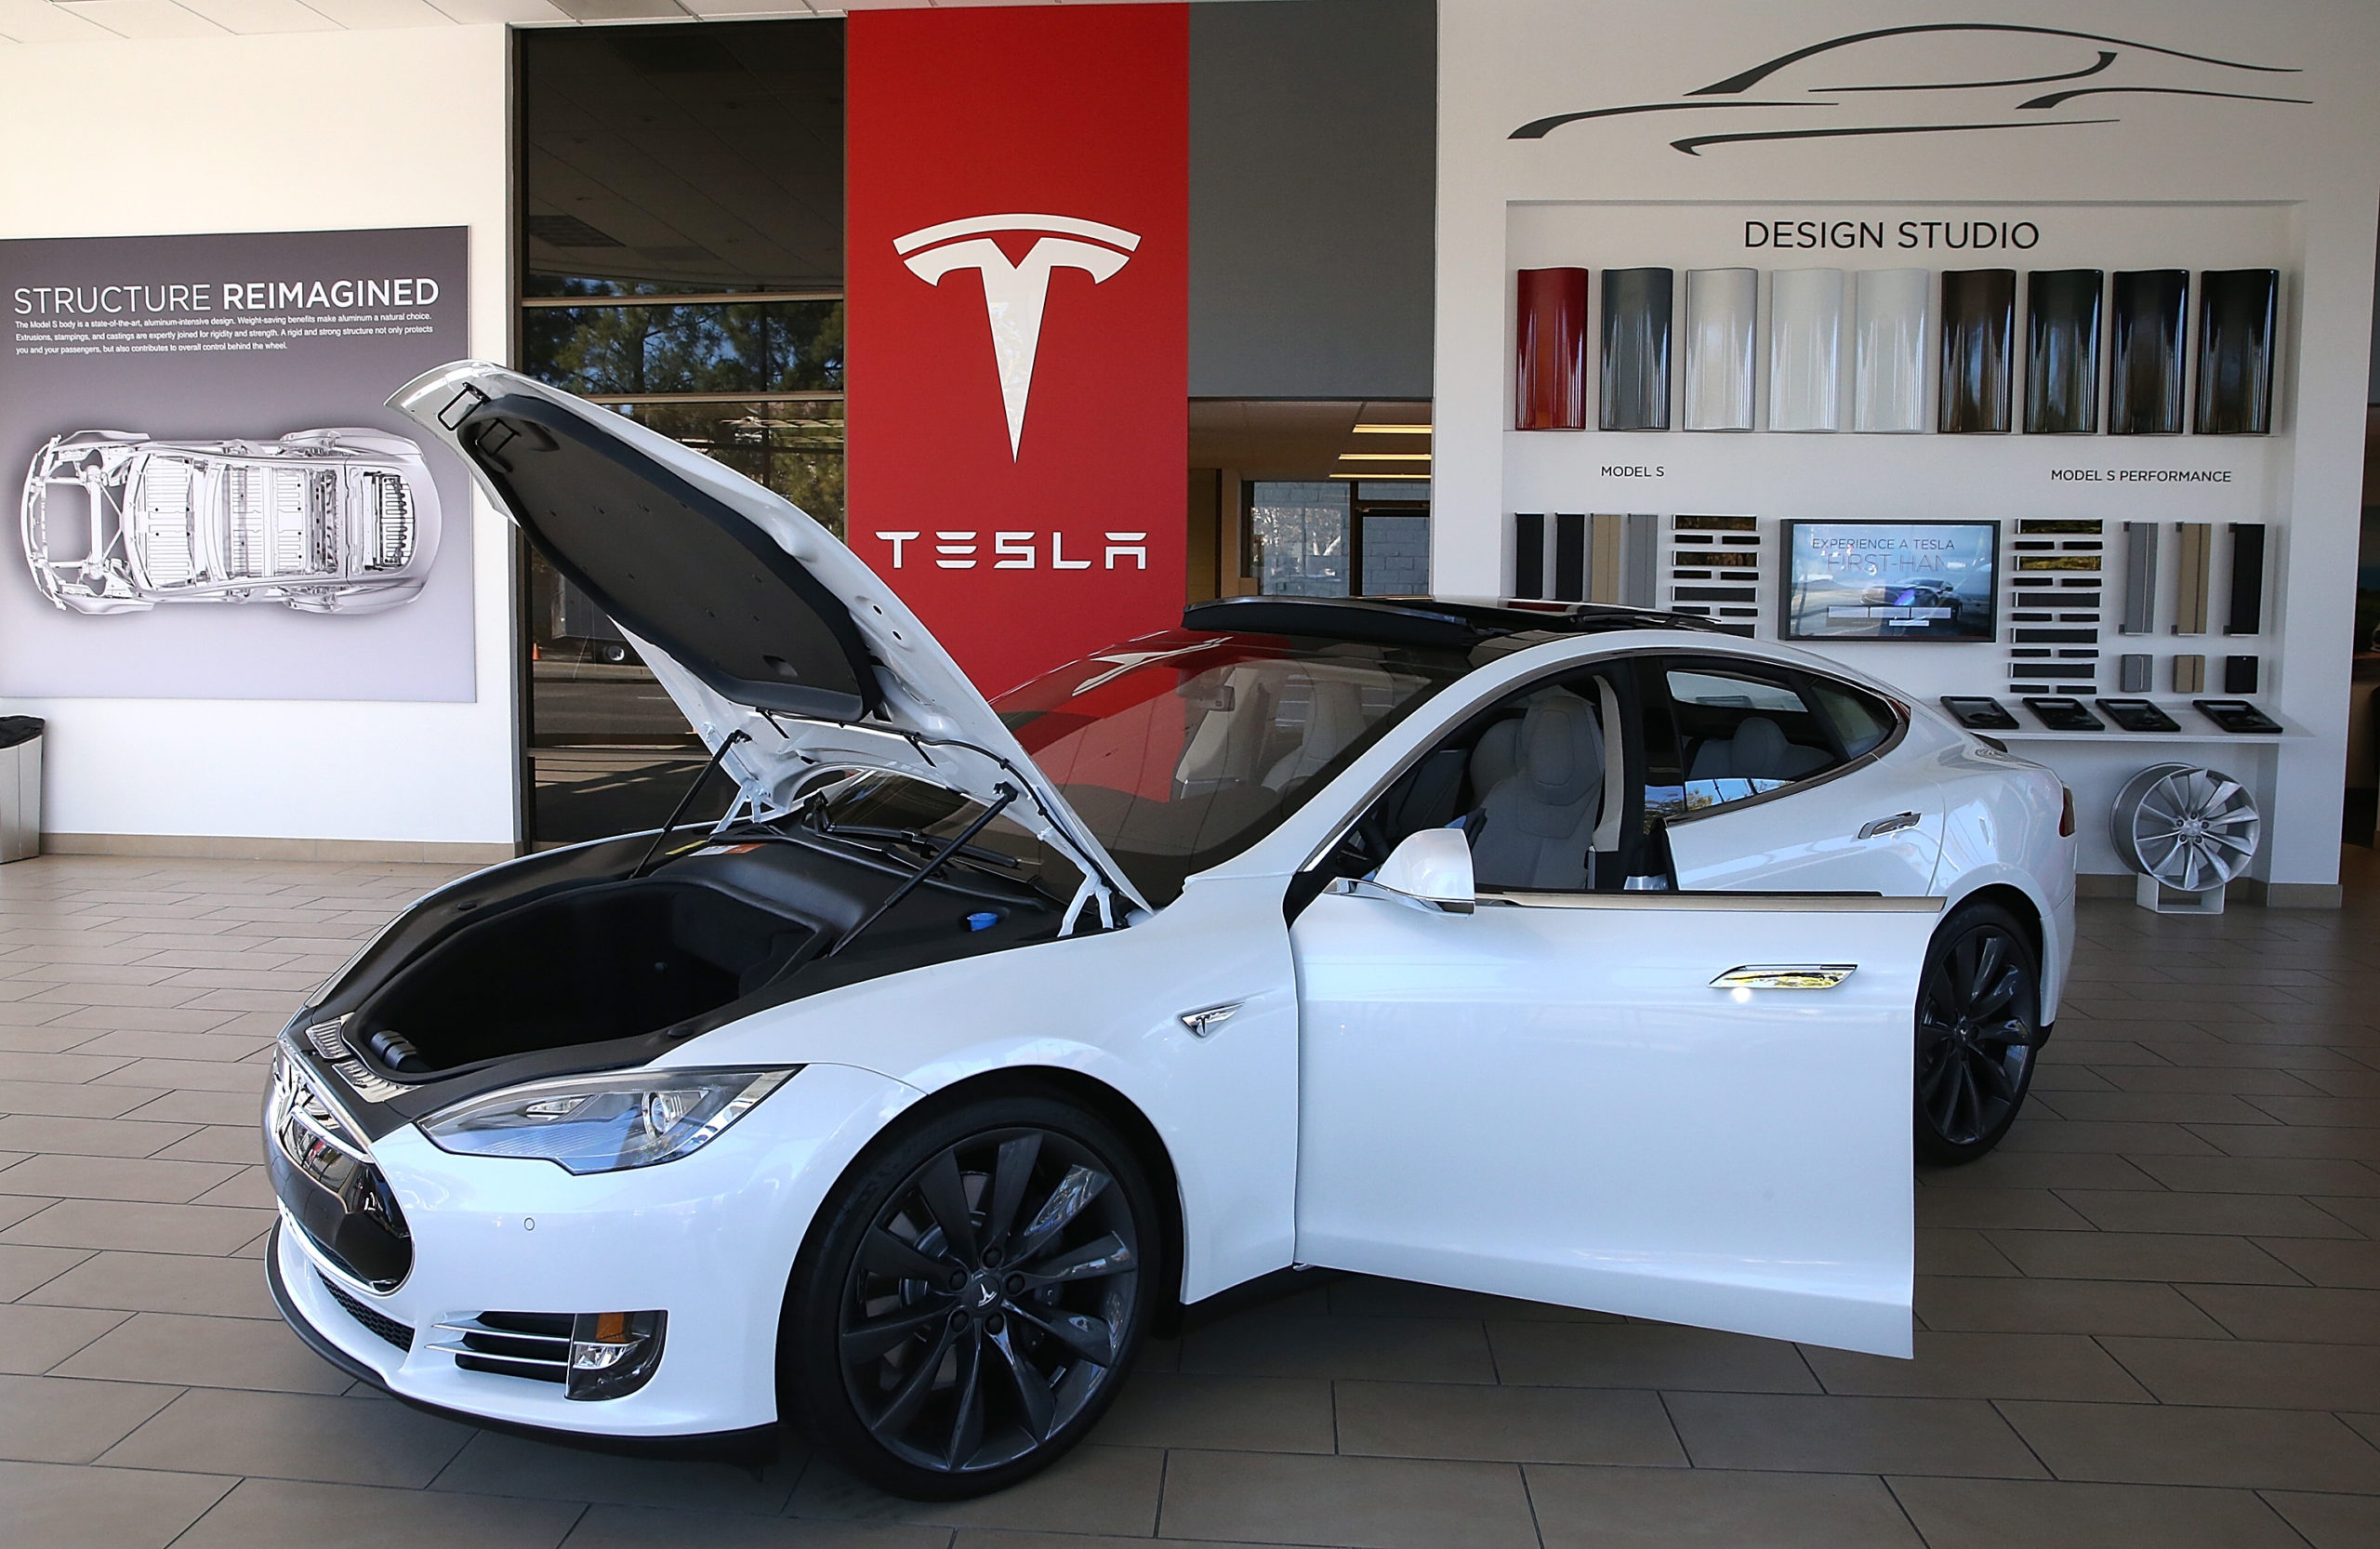 A Tesla Model S car is displayed at a Tesla showroom on November 5, 2013 in Palo Alto, California. (Photo by Justin Sullivan/Getty Images)